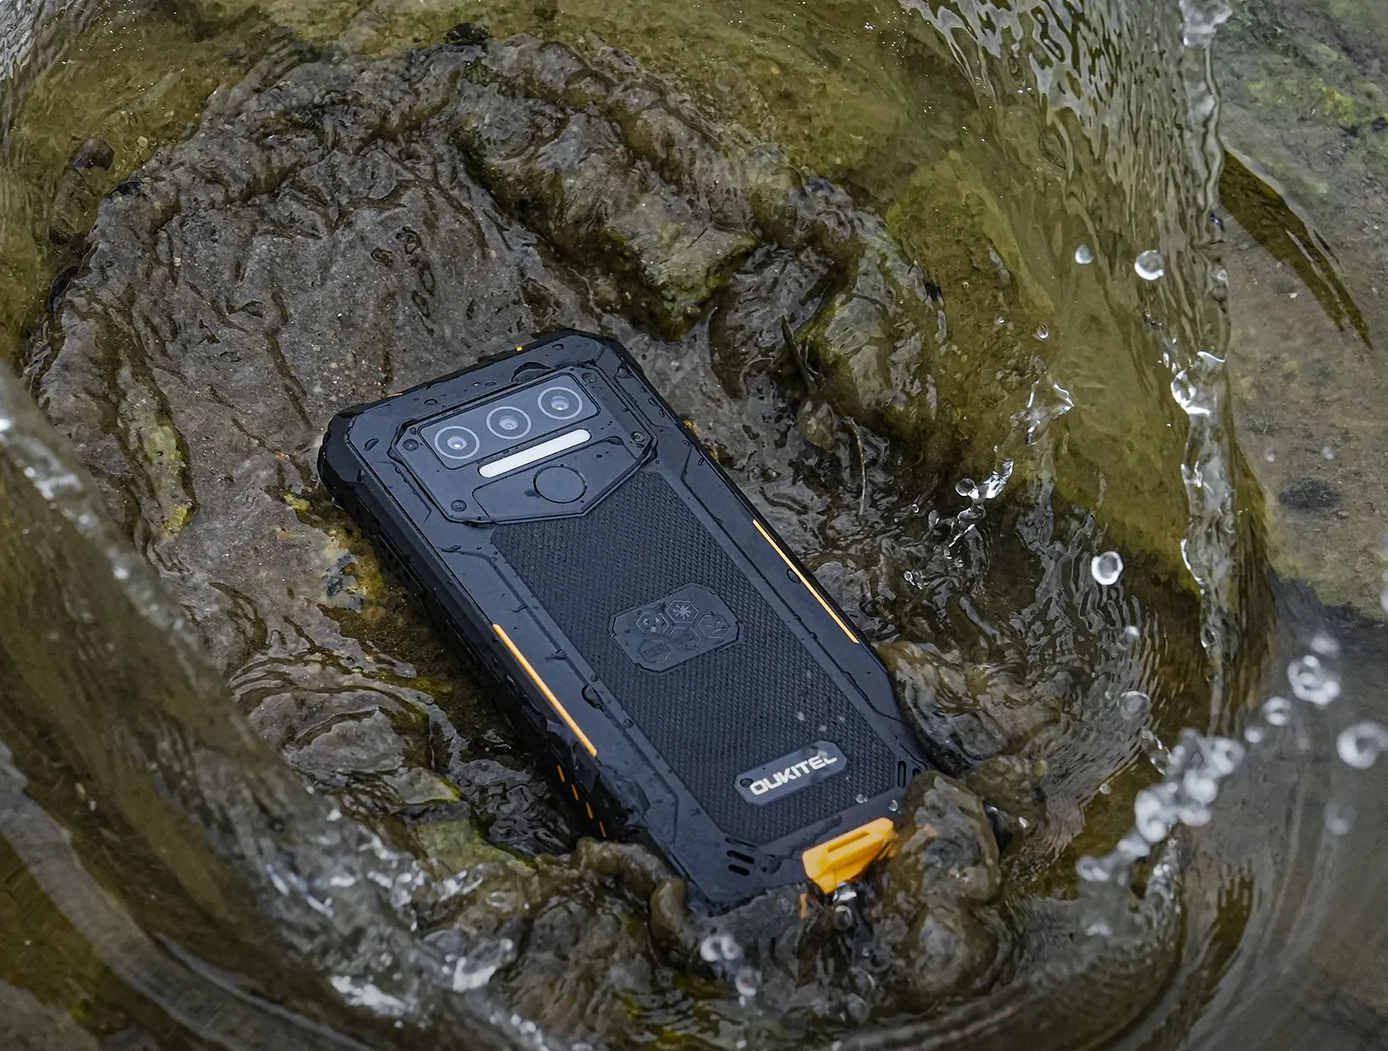 OUKITEL WP23 Pro: the new rugged and low-cost smartphone is now available for $169.99